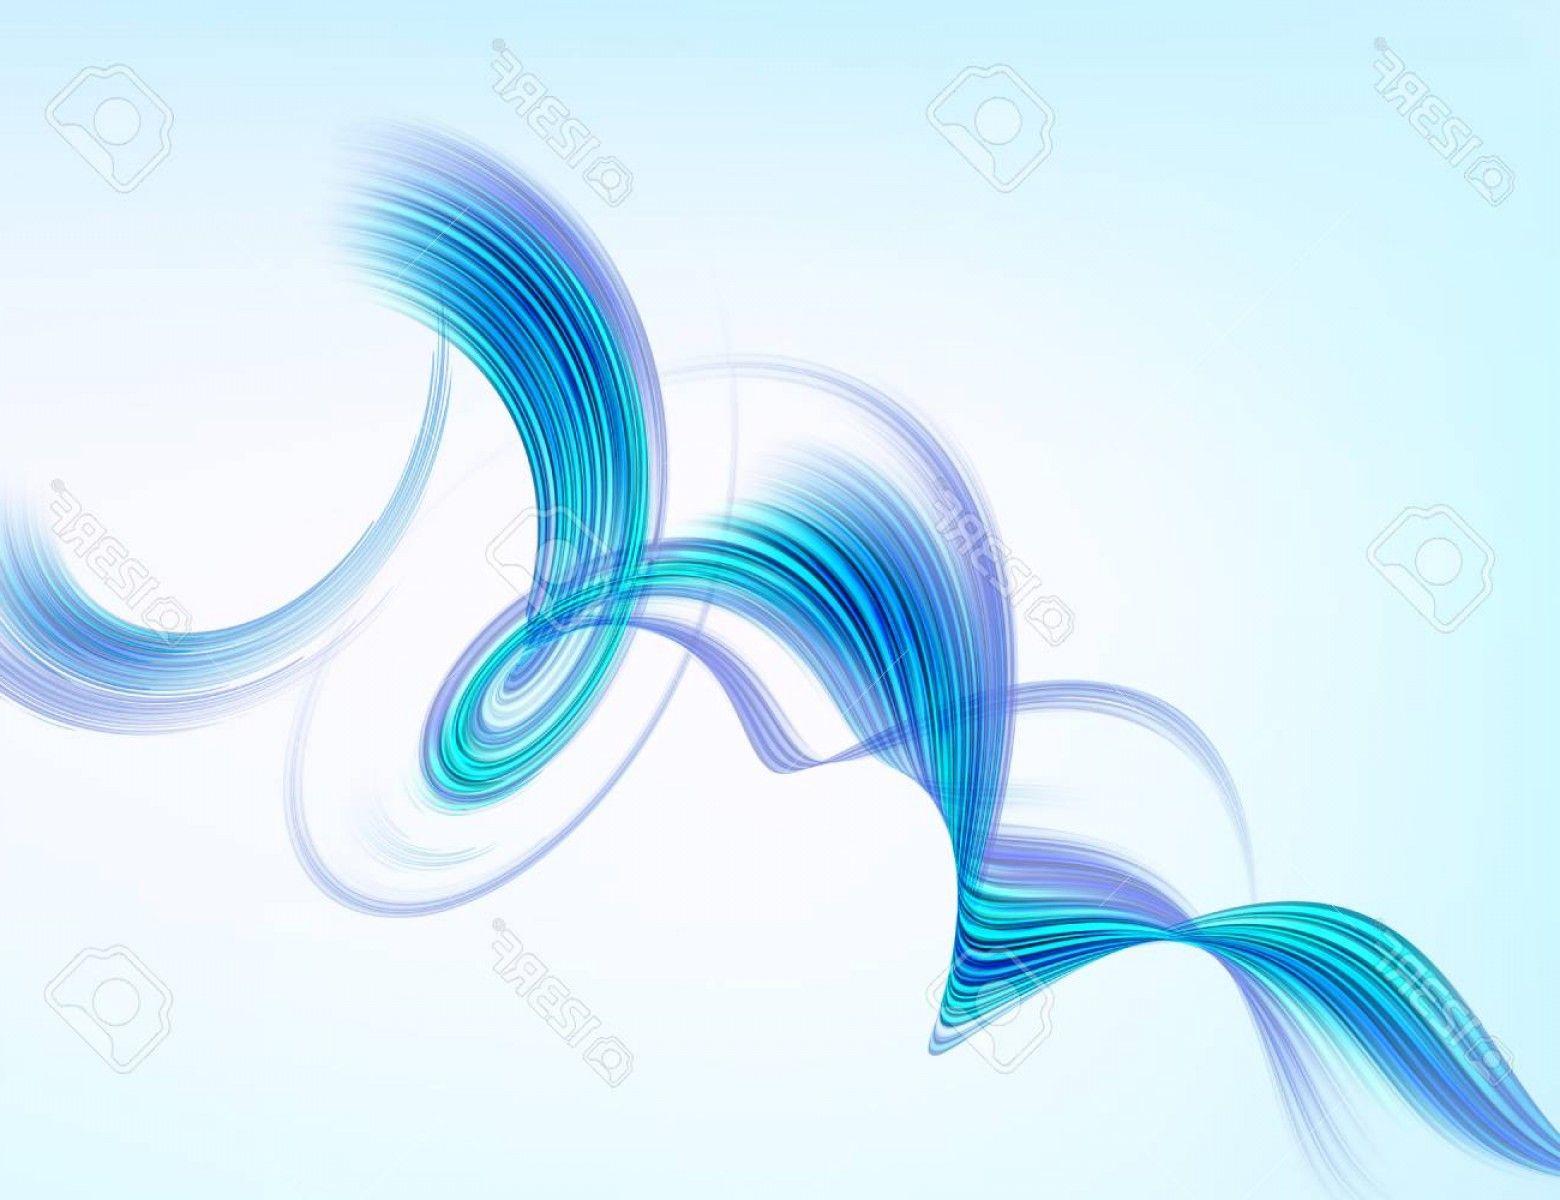 Blue and White Swirl Logo - Photostock Vector Vector Background Abstract Blue Swirl Isolated On ...